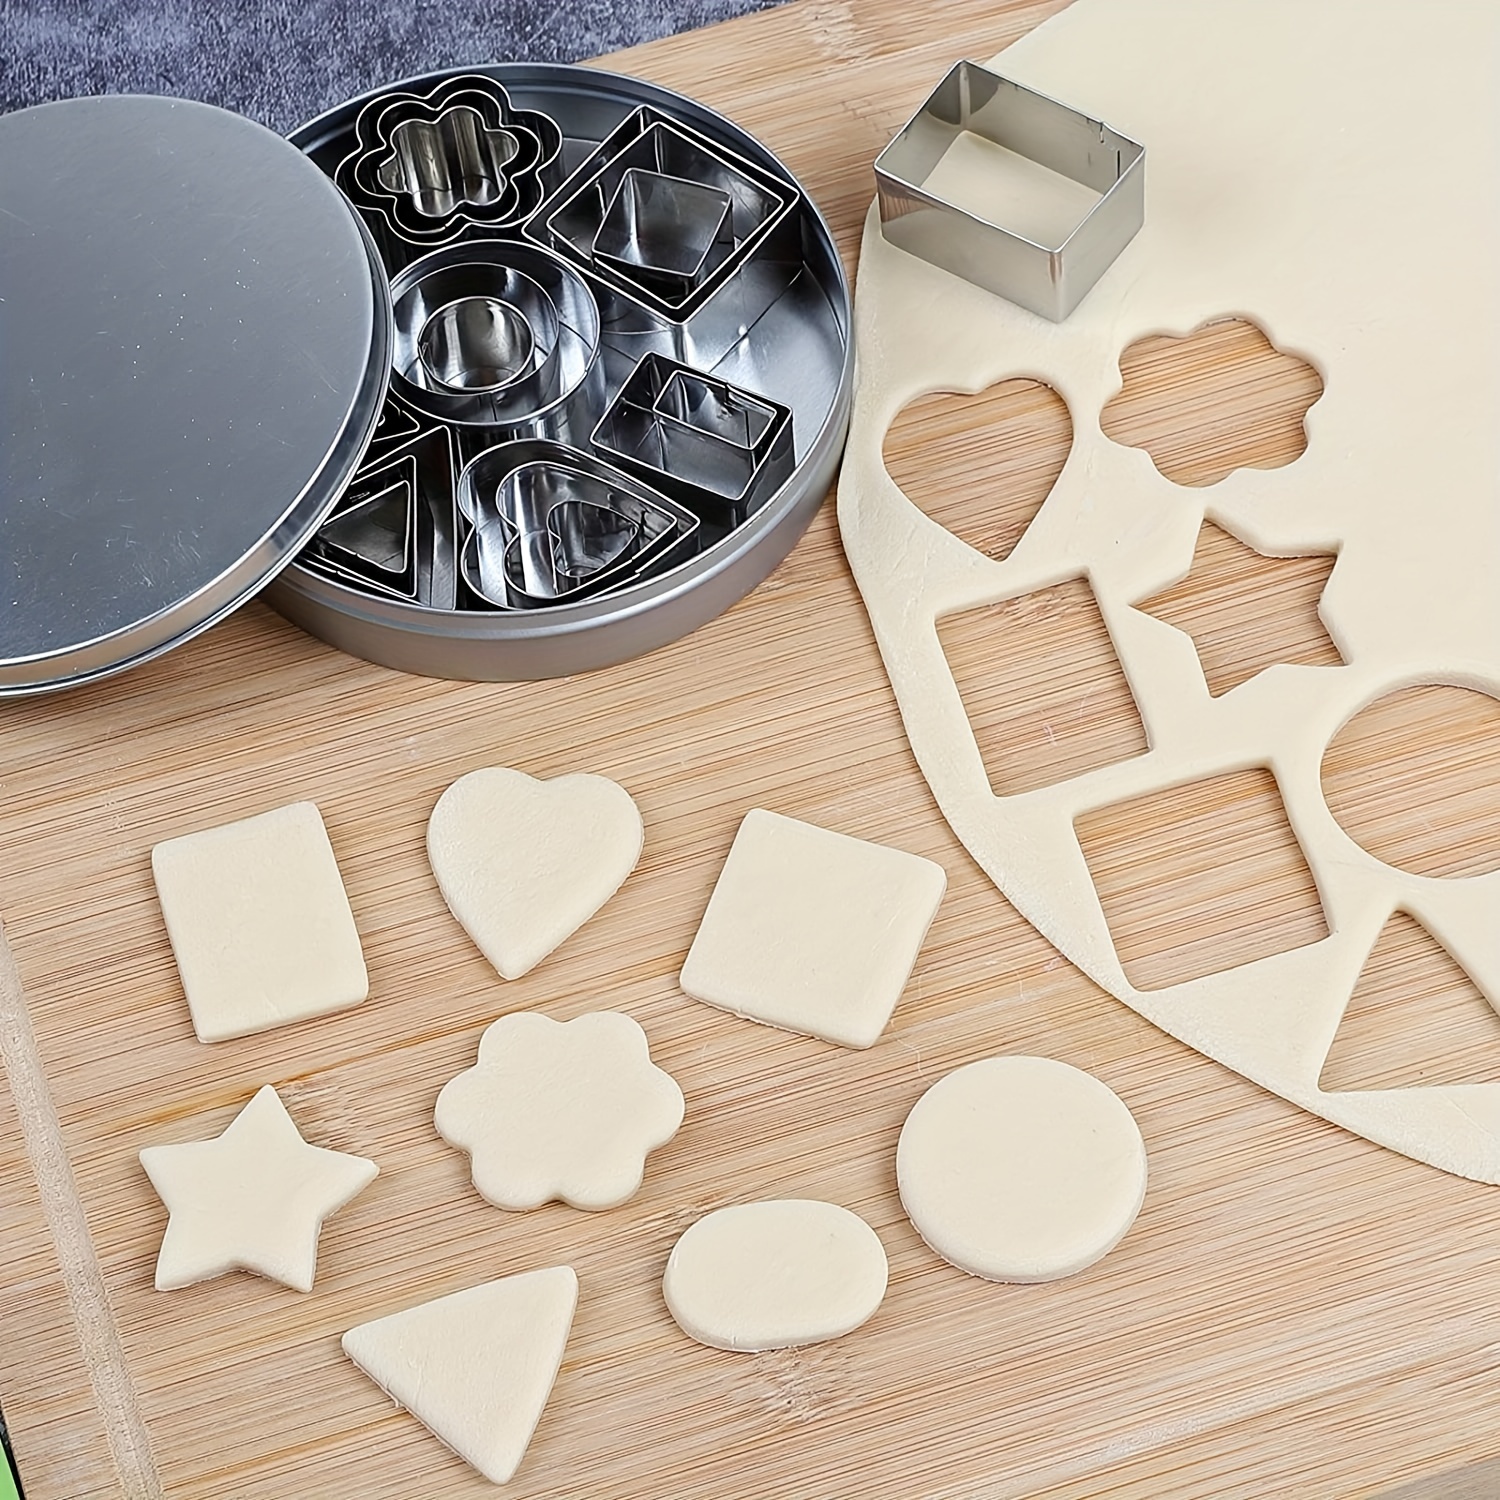 Stainless Steel Pastry Cookie Biscuit Cutter Cake Muffin Decor Mold for  Kitchen Multifunctional Tool